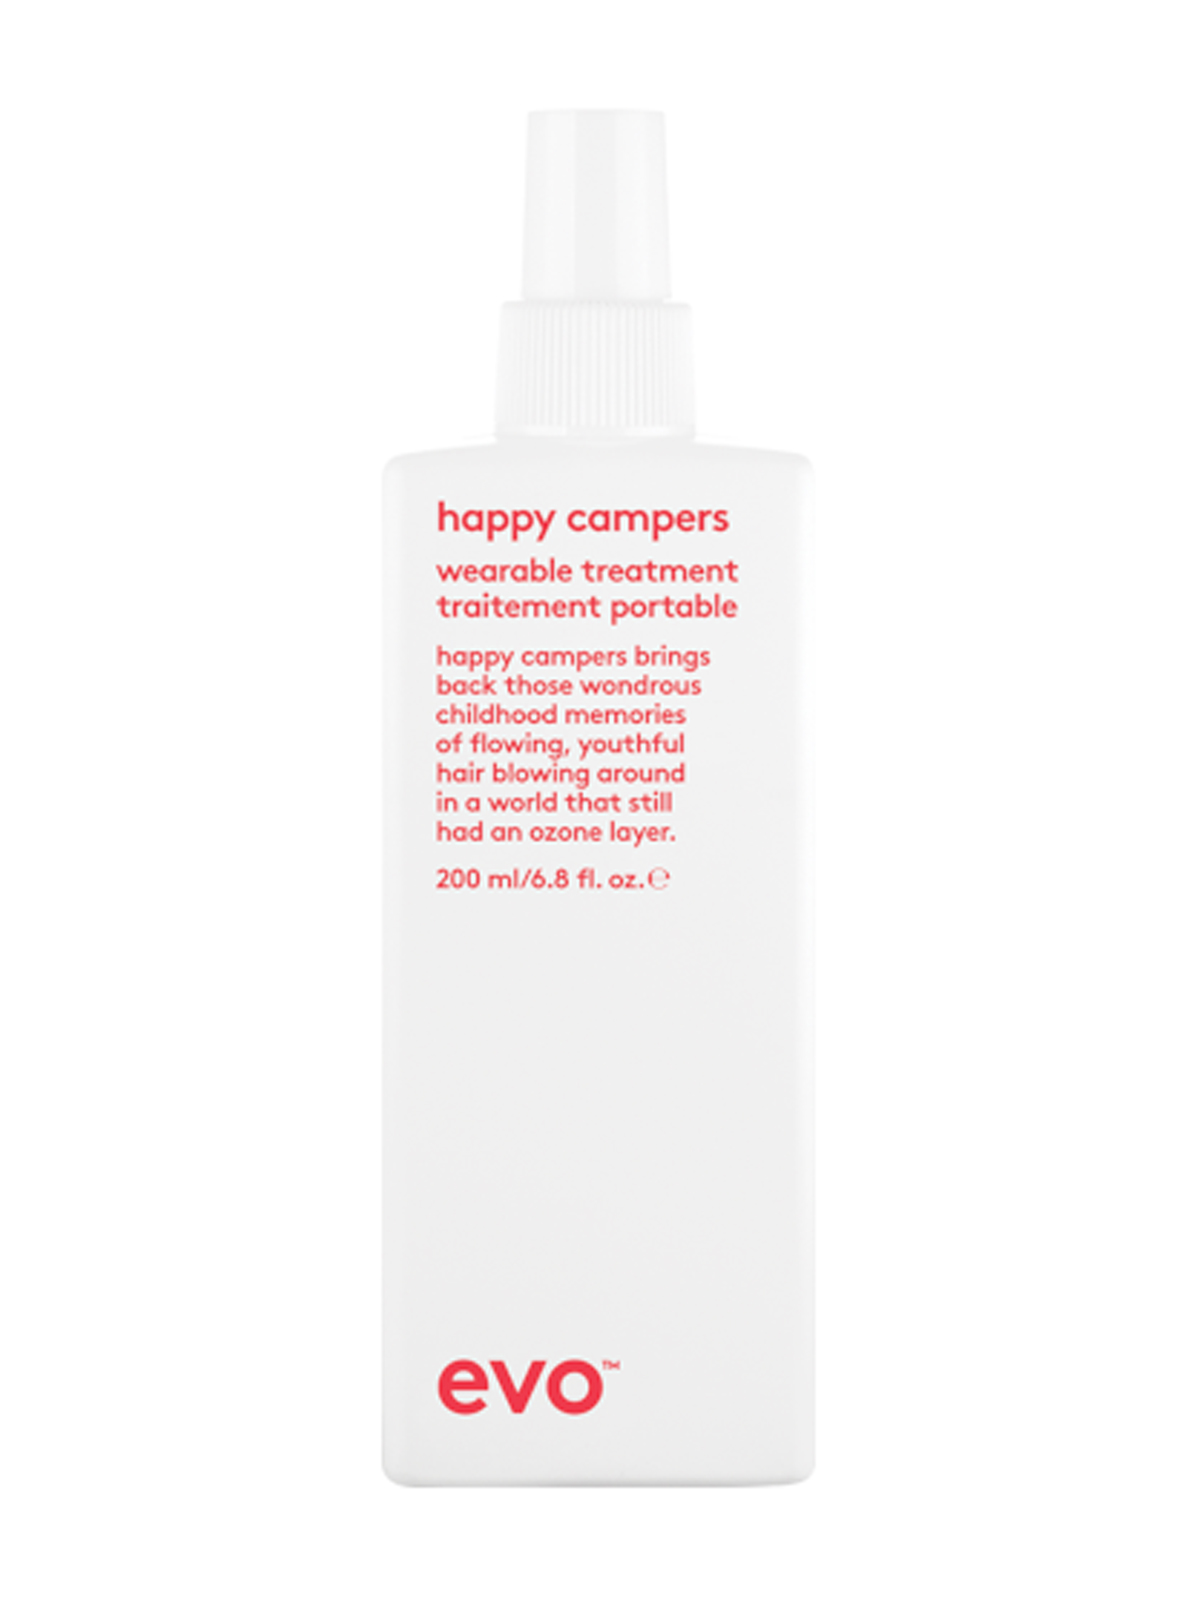 EVO happy campers wearable treatment